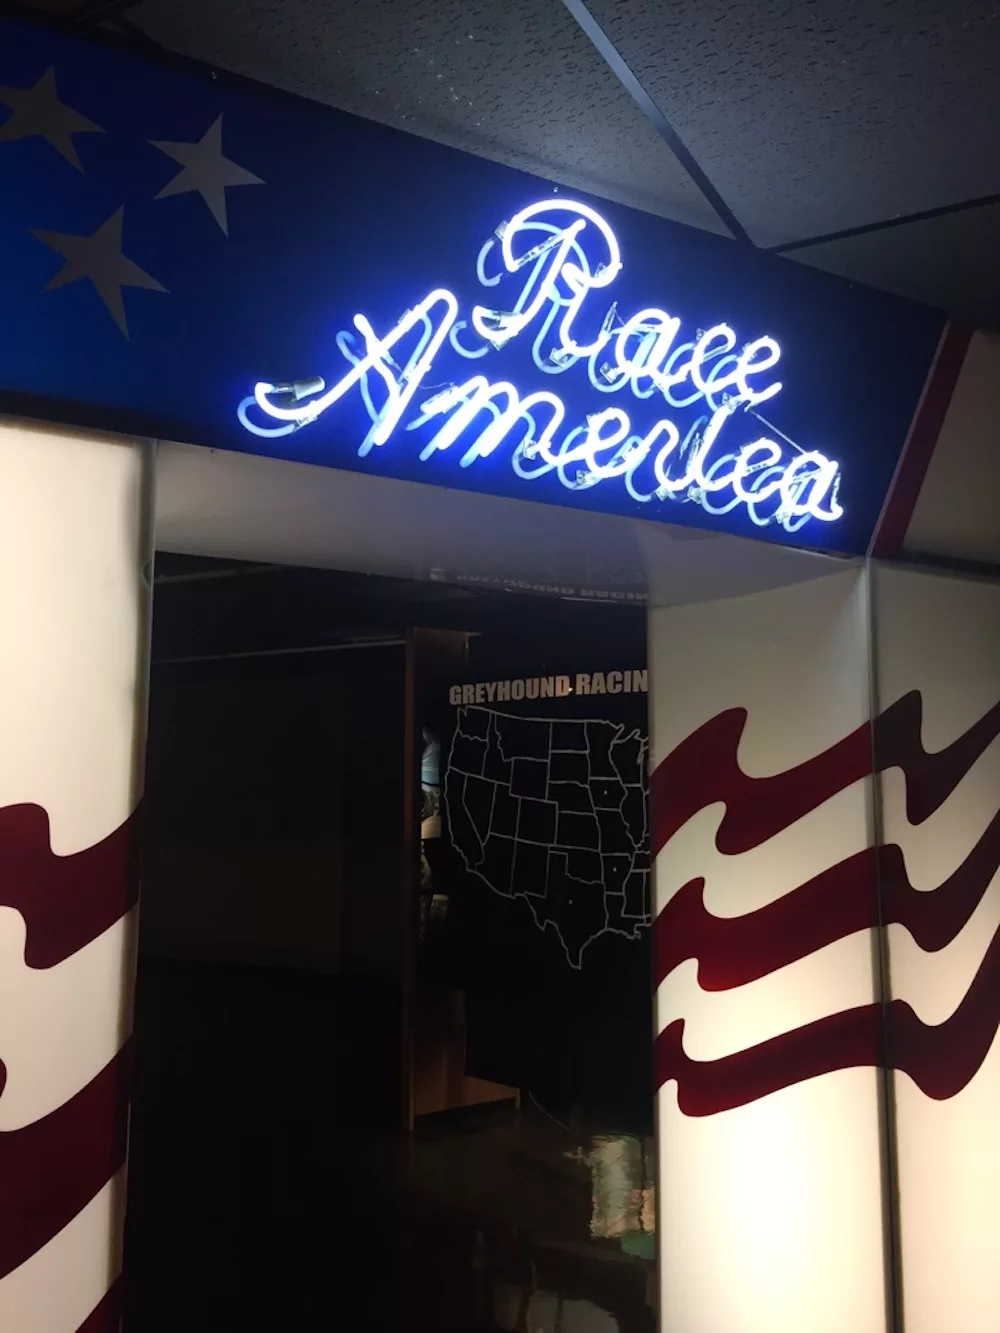 Race America blue neon sign at the Greyhound Hall of Fame in Abilene, Kansas